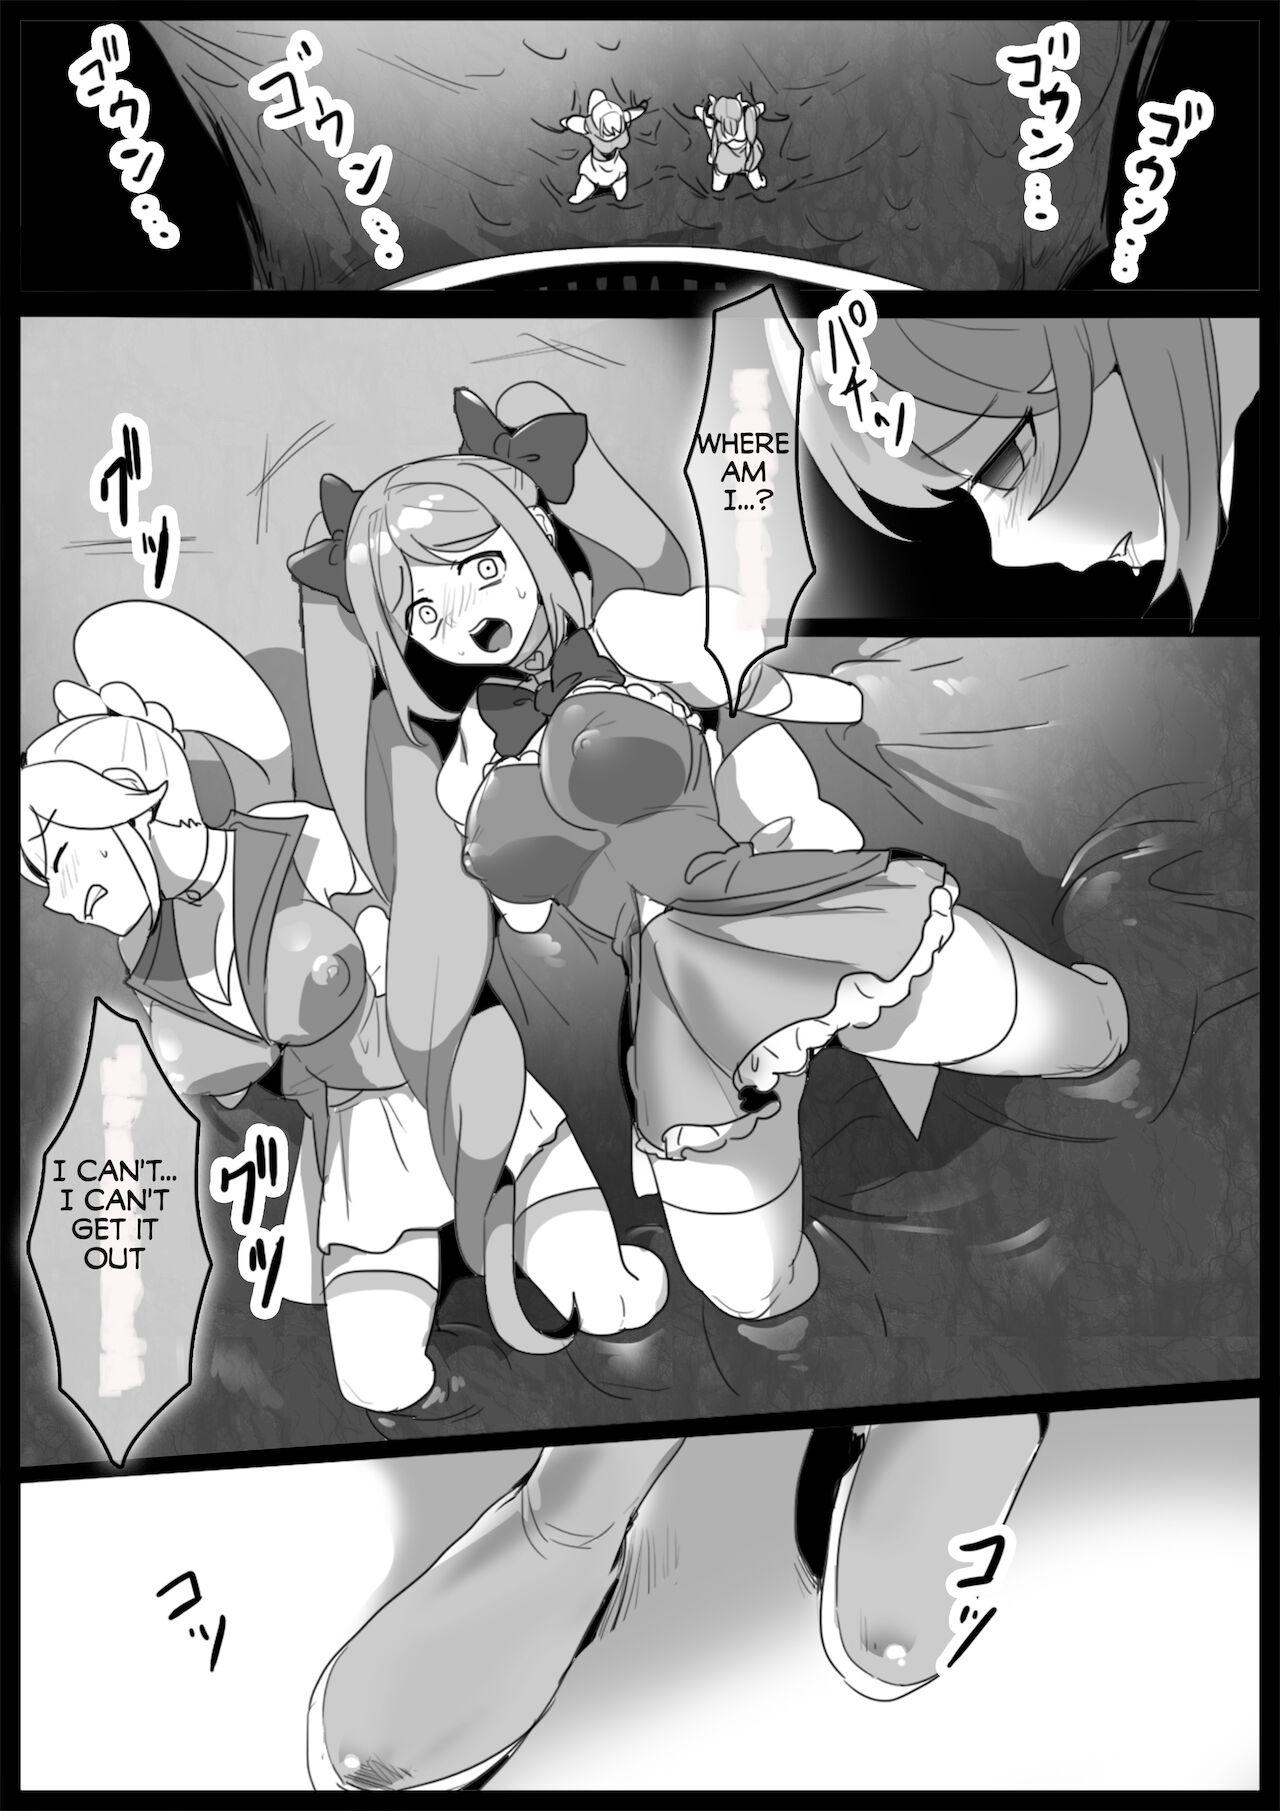 Jacking Off Magical Girl Seedbedded and Corrupted in the Final Episode Lesbians - Page 2